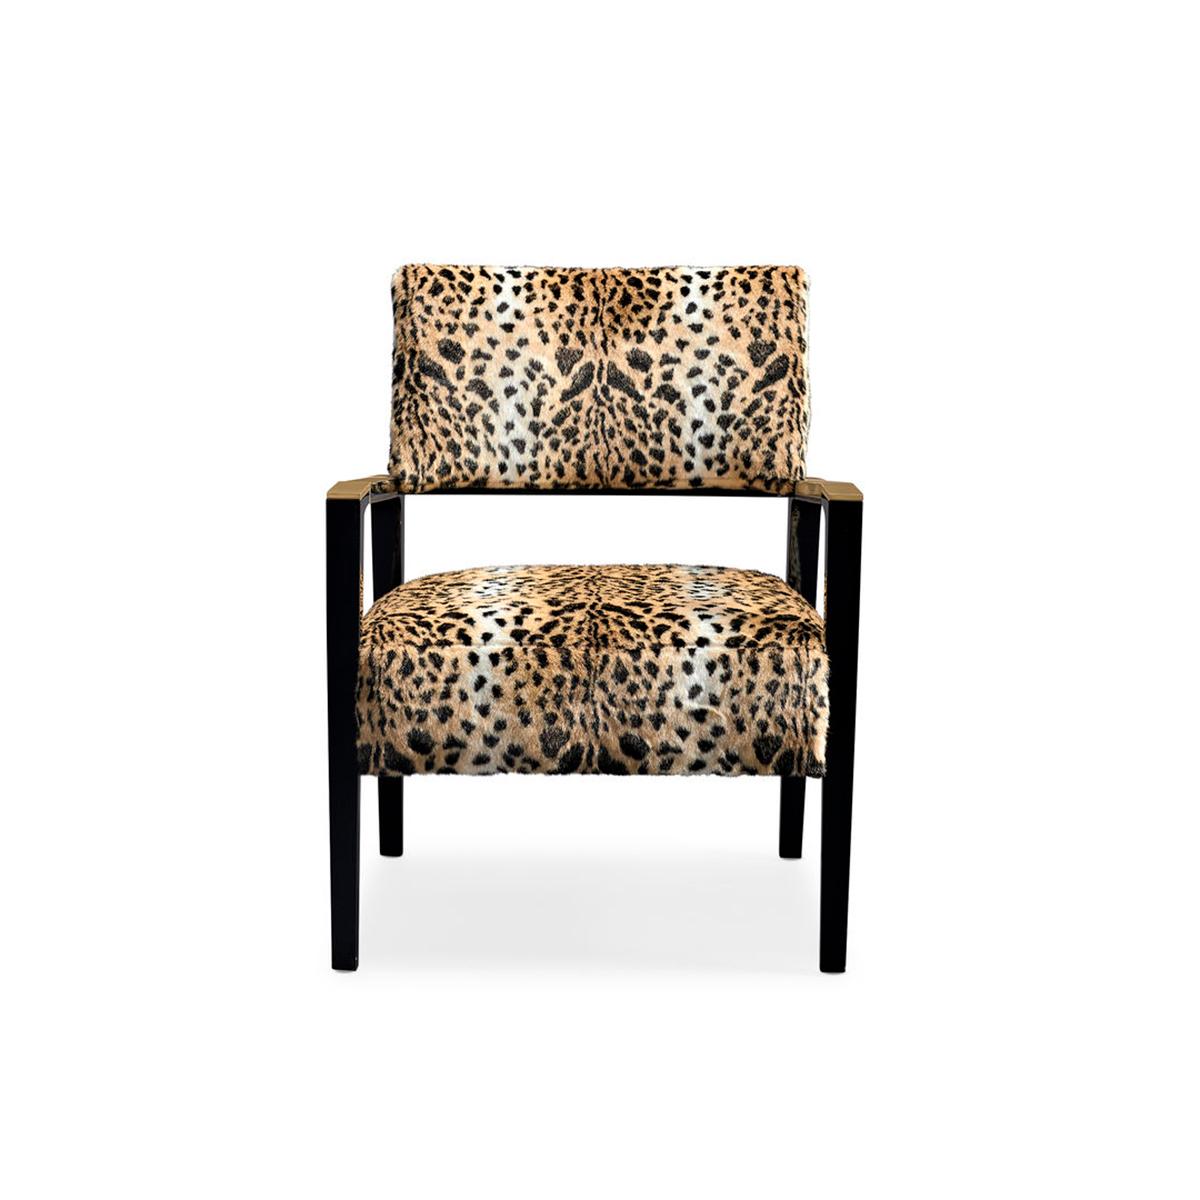 Dressed in an exotic faux leopard fur, its angular mid-century French-inspired frame features a Laque Noire finish with brilliant gold accents that highlight the arms. The back gently curves adding comfort and a seductive element to the already